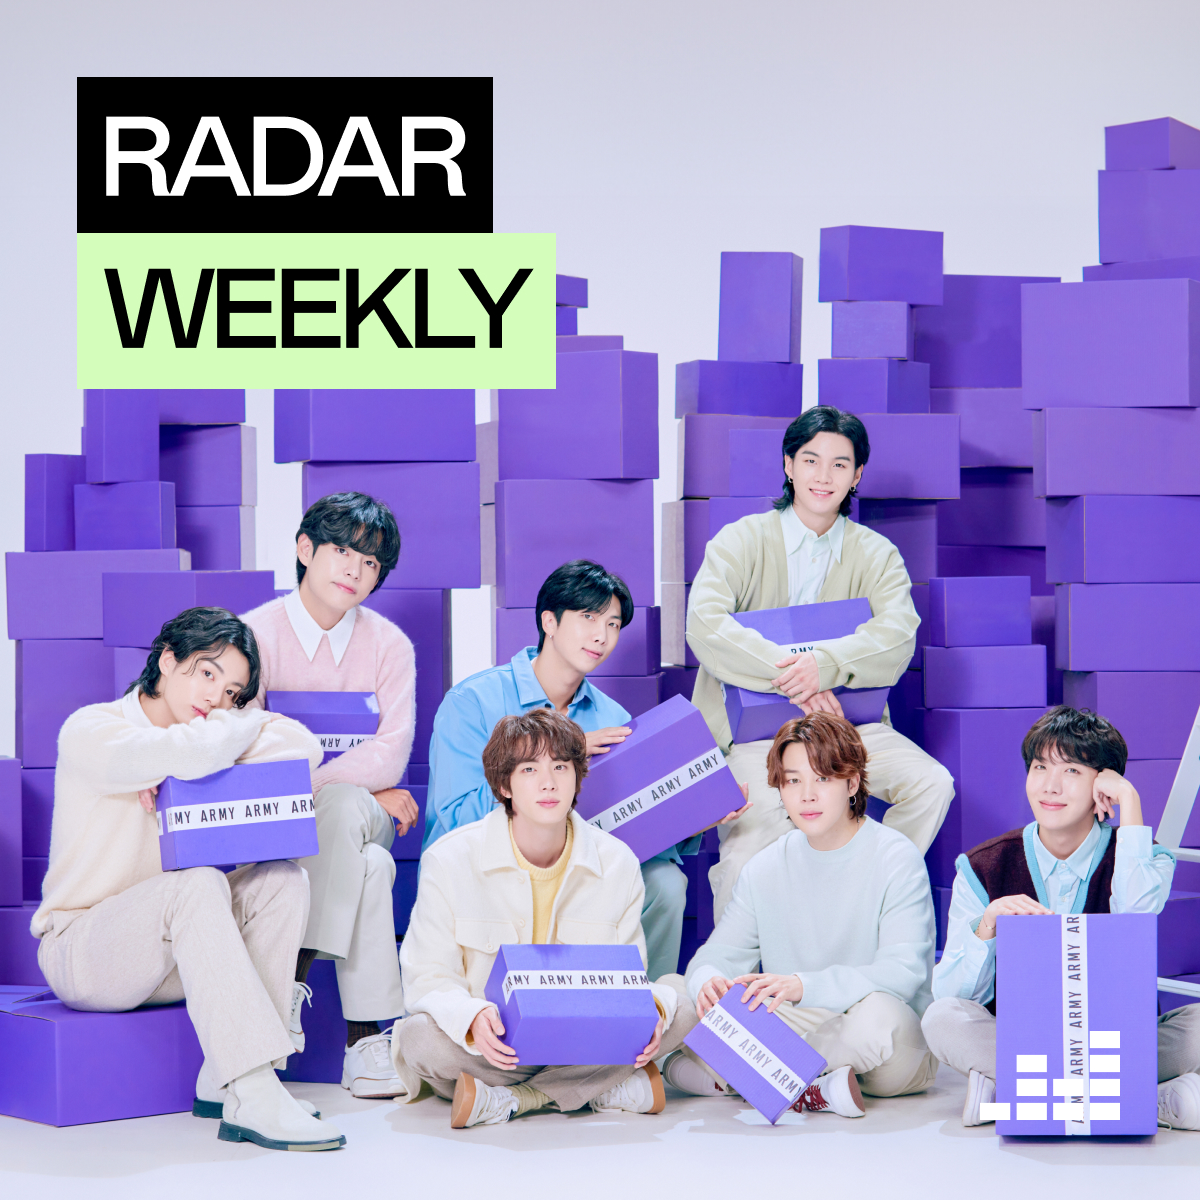 Check out 'Take Two' on Radar Weekly and Top K-Pop playlists @deezer right now! 💜 deezer.lnk.to/RadarWeekly 💜 deezer.lnk.to/TopK-Pop #BTS #방탄소년단 #TakeTwo